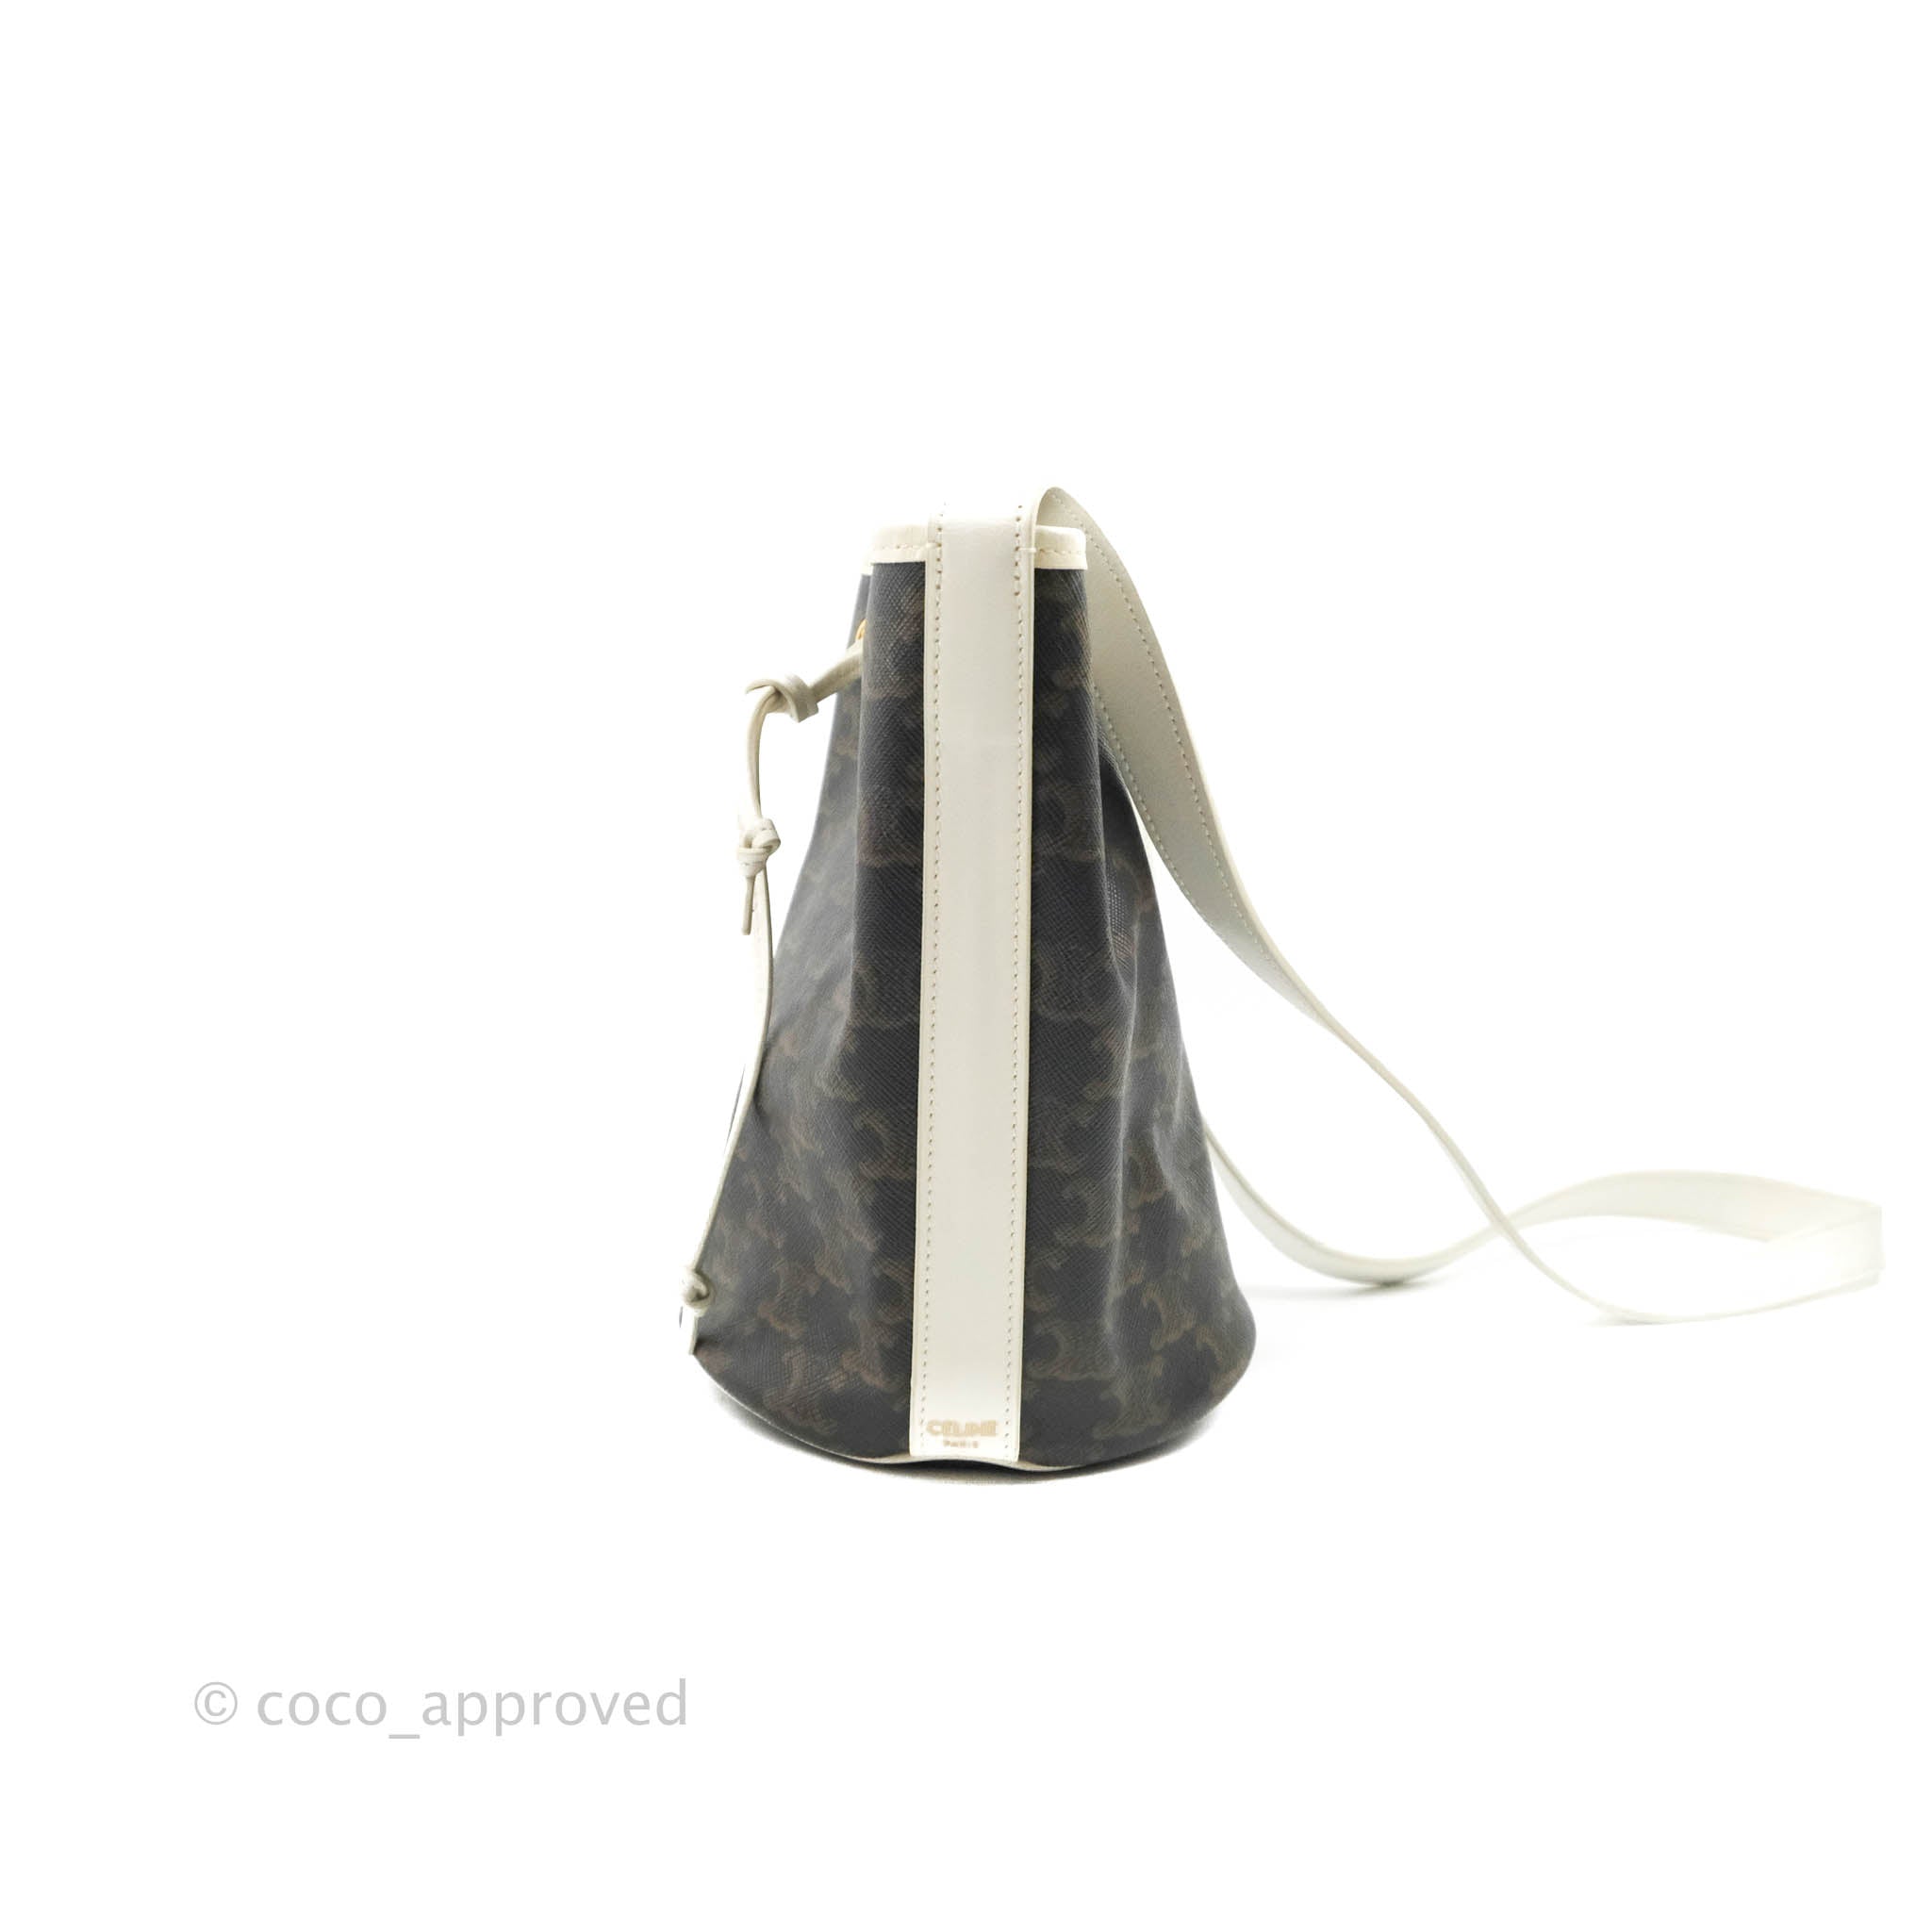 SMALL BUCKET IN TRIOMPHE CANVAS AND CALFSKIN - WHITE